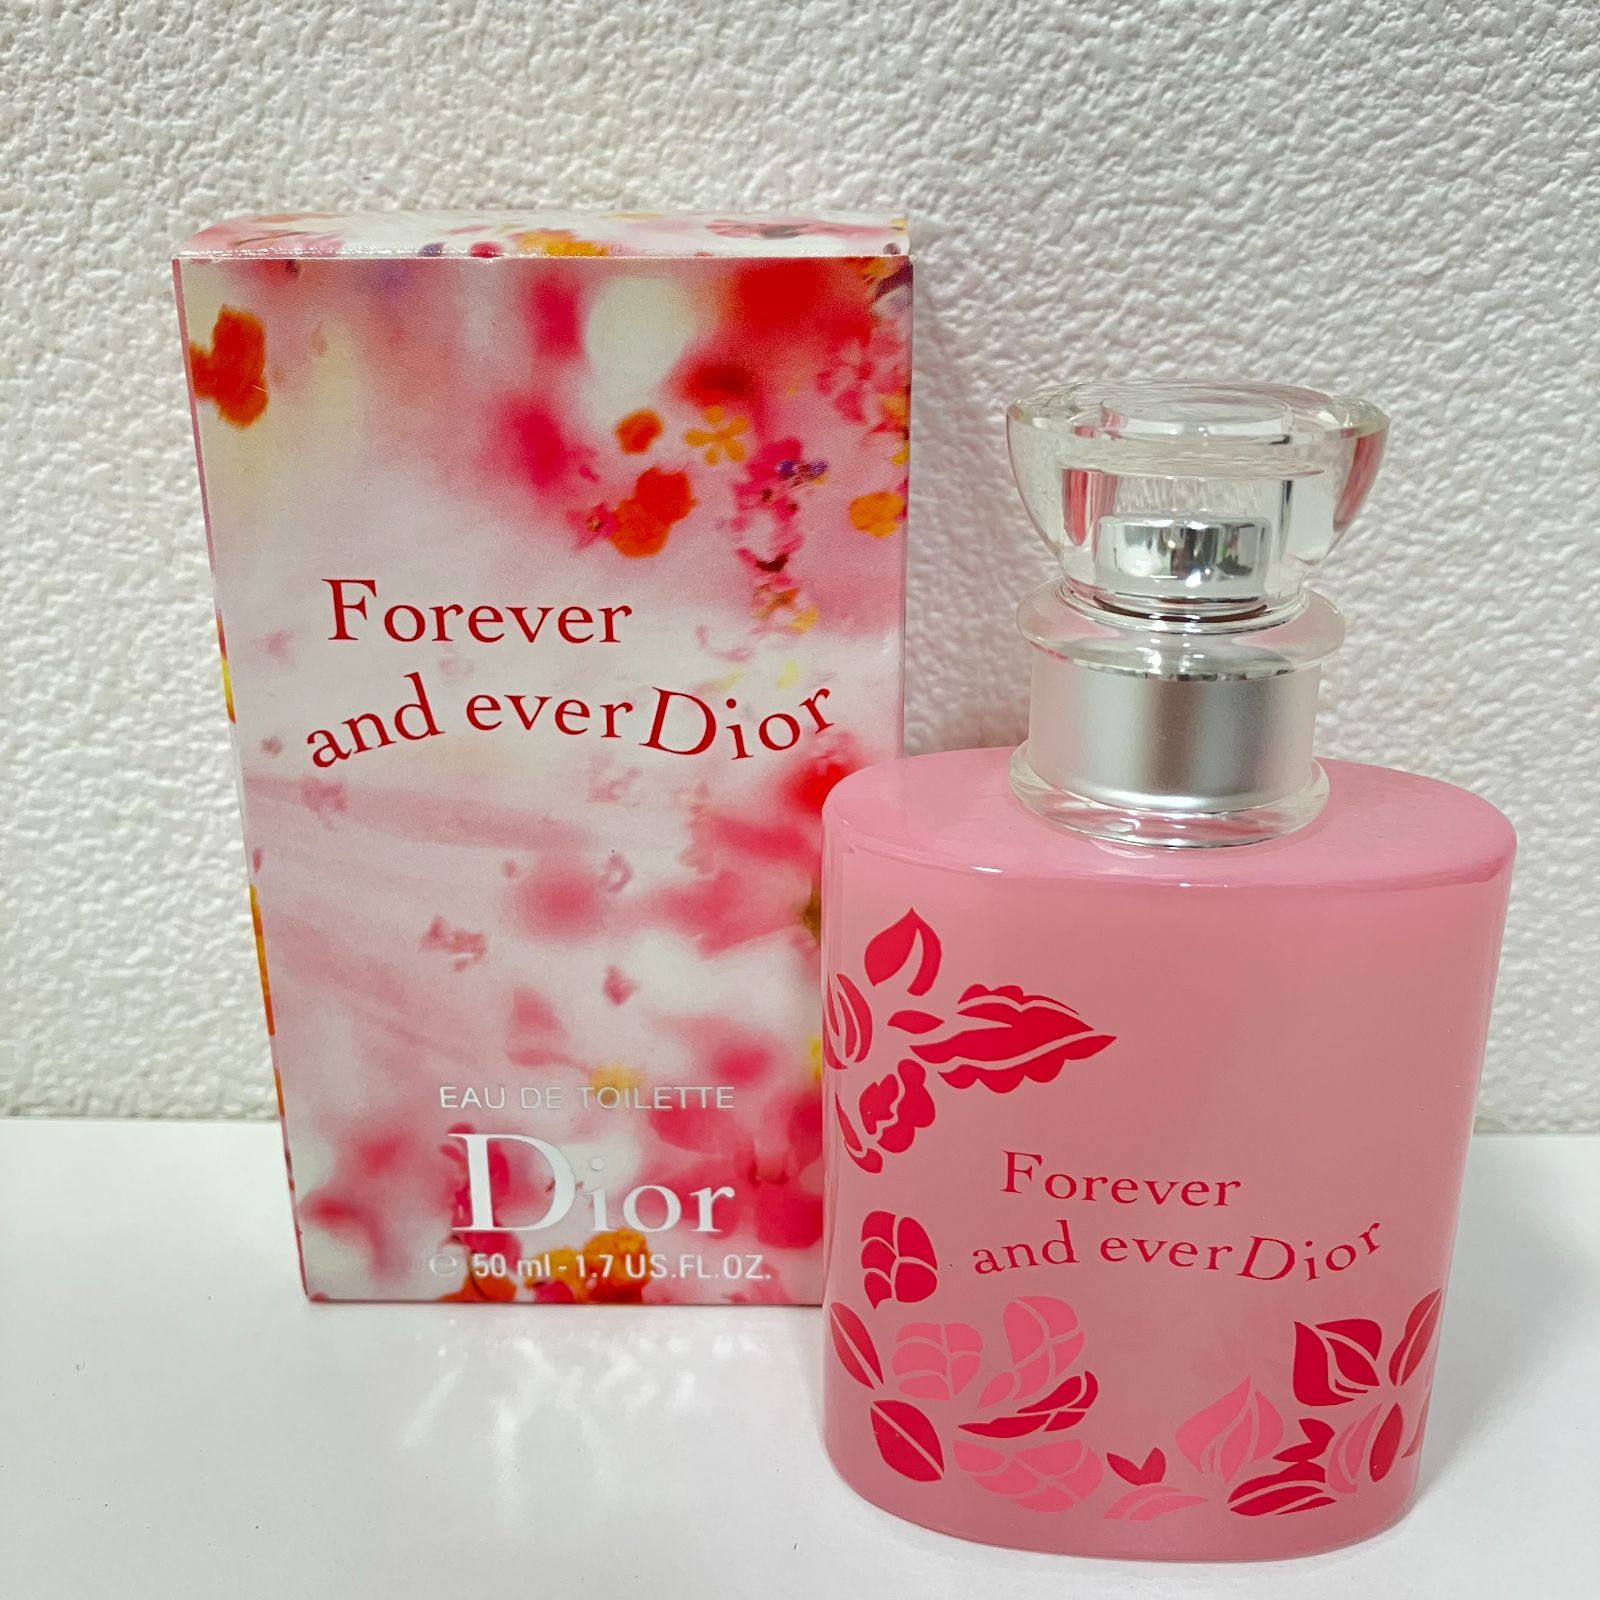 H13684】その他 香水 Dior ディオール Forever and ever EAU DE